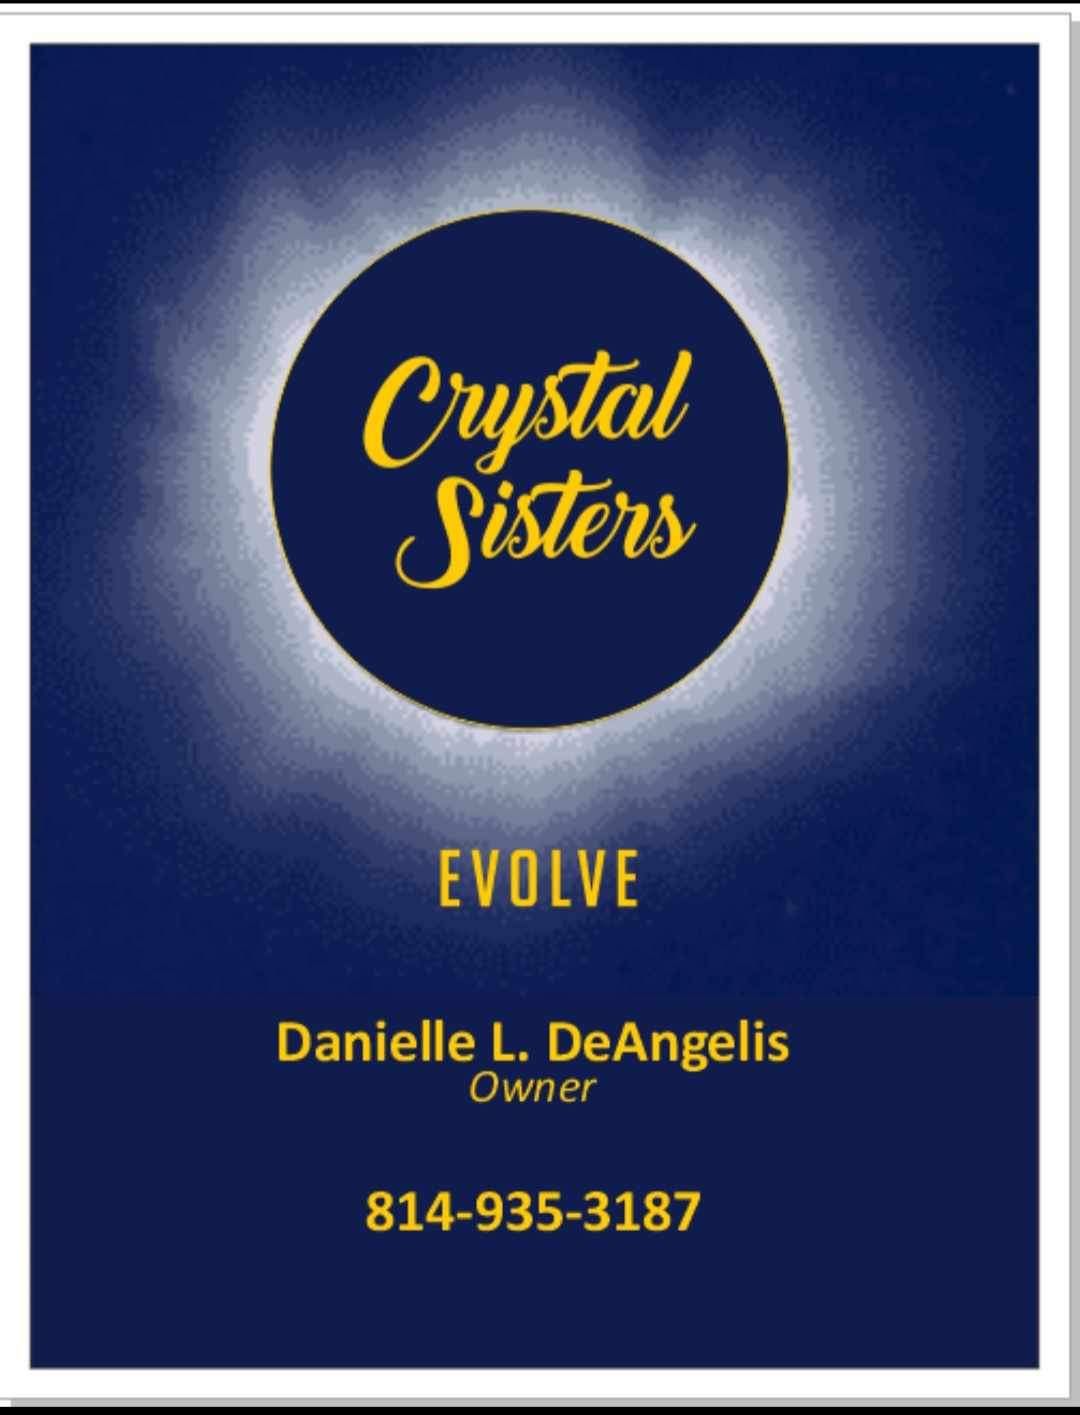 Crystal Sister\u2019s LLC \u201cPop Up\u201d Event with Danielle DeAngelis also known as Pete WP! 